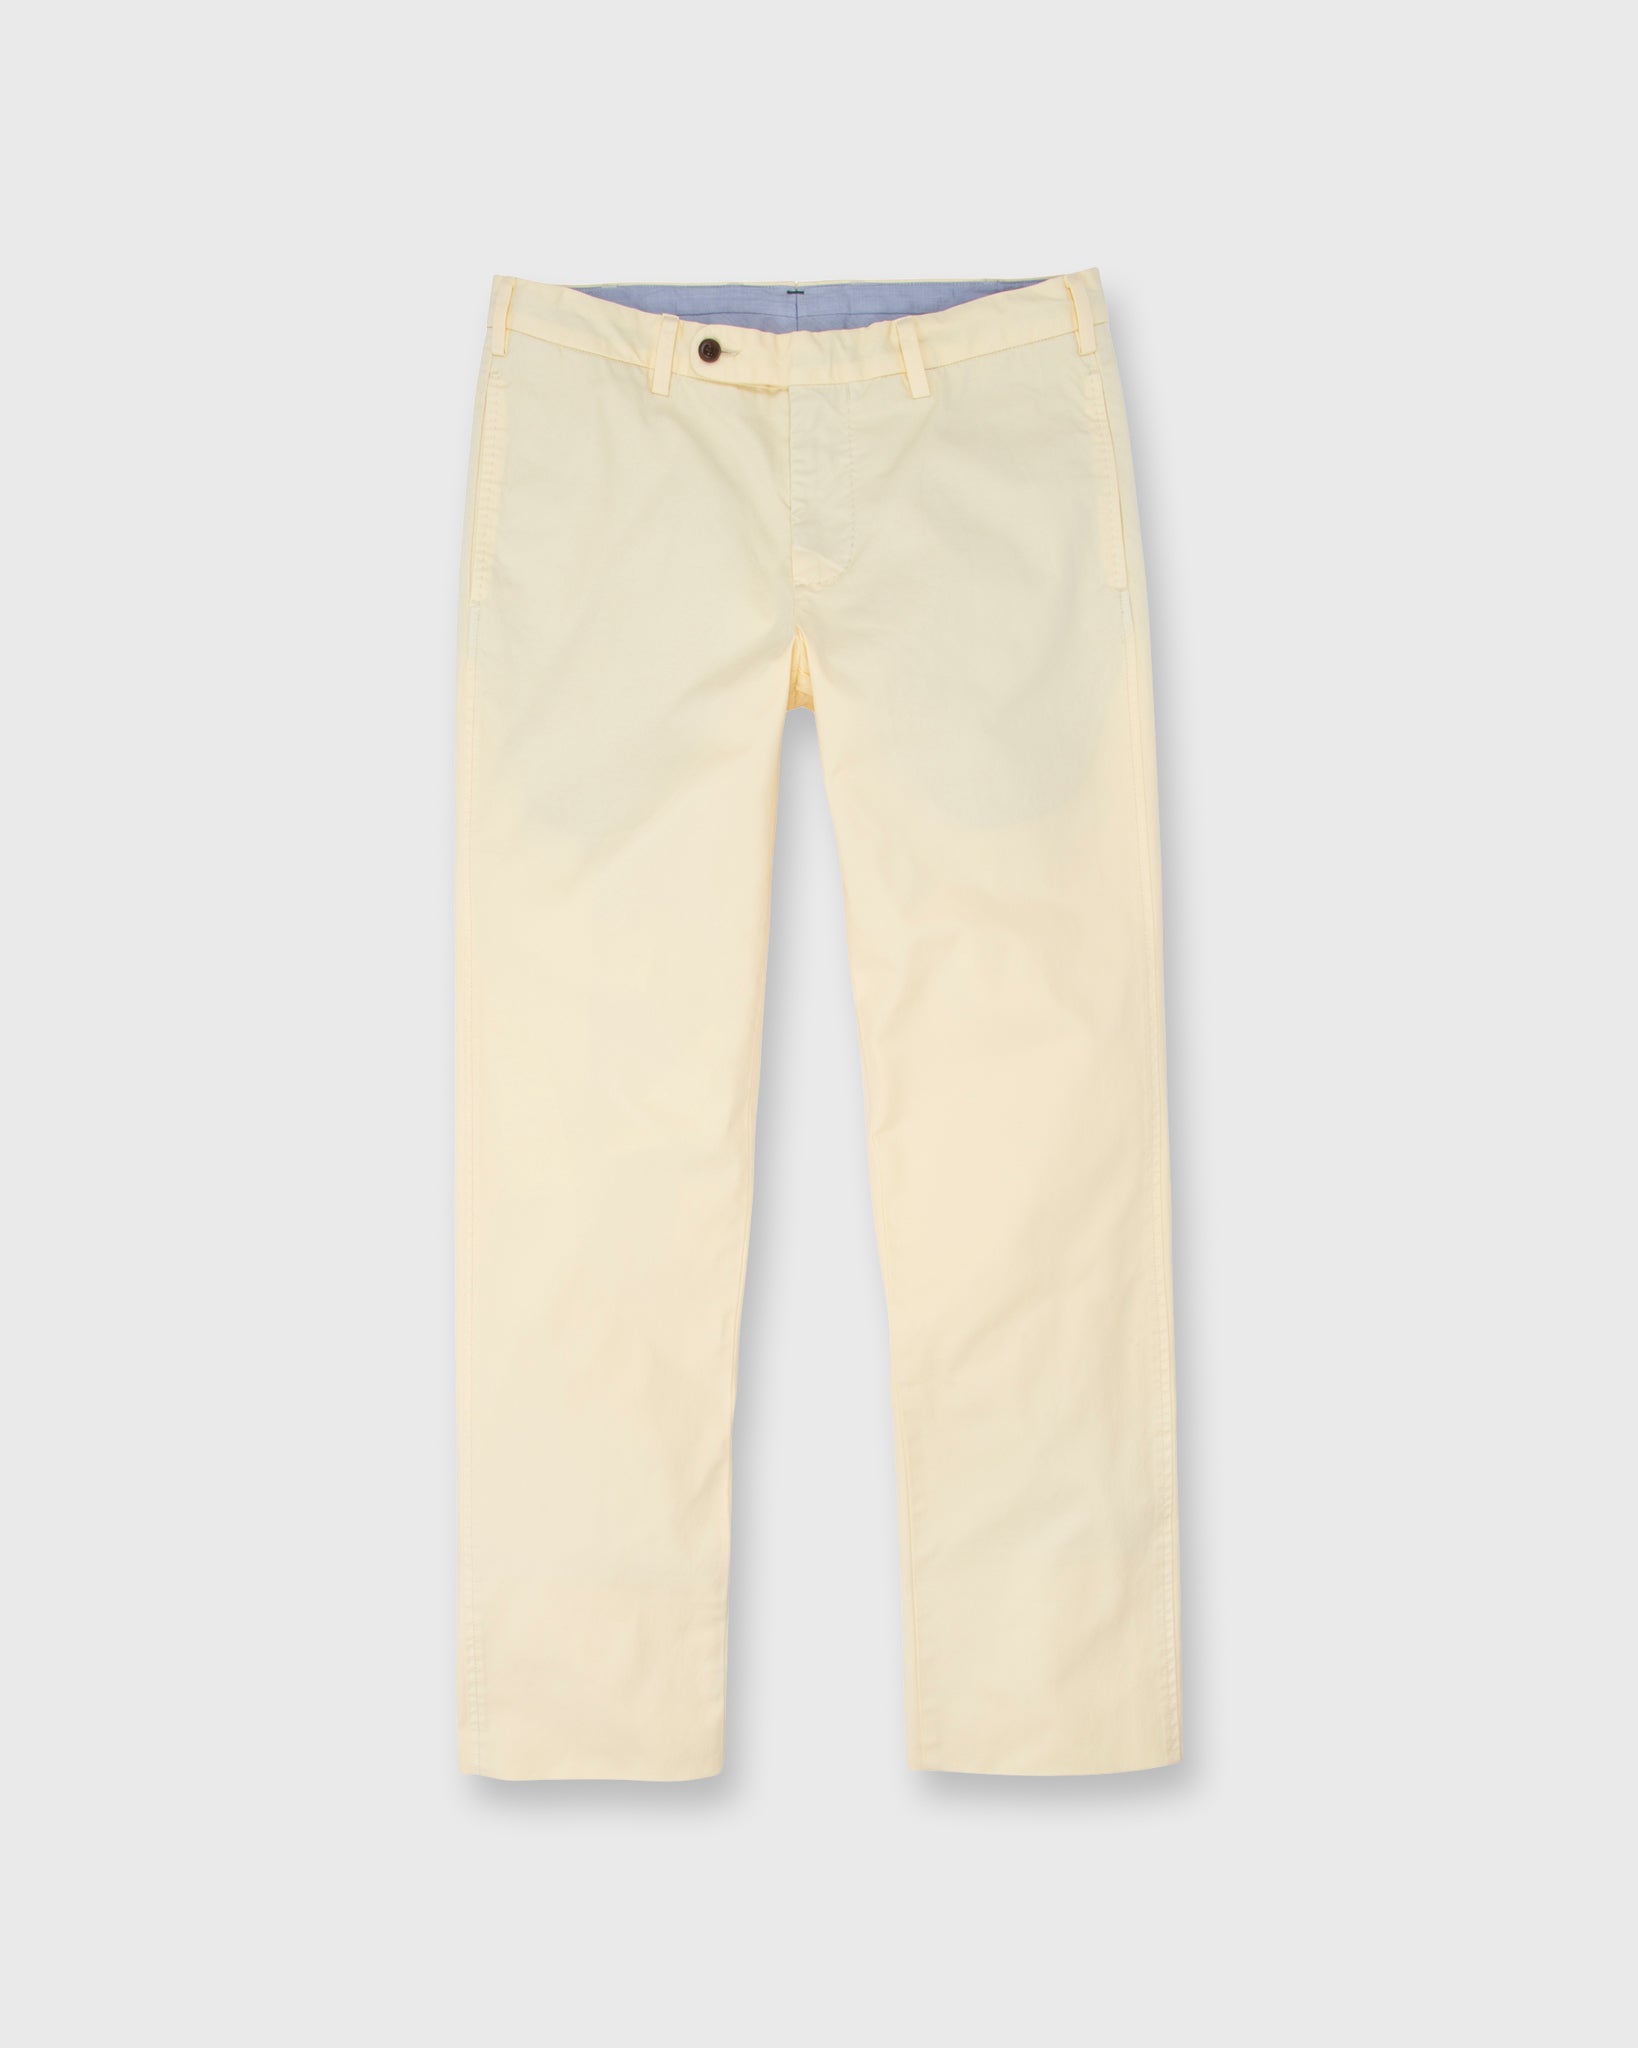 Garment-Dyed Sport Trouser in Pale Yellow AP Lightweight Twill